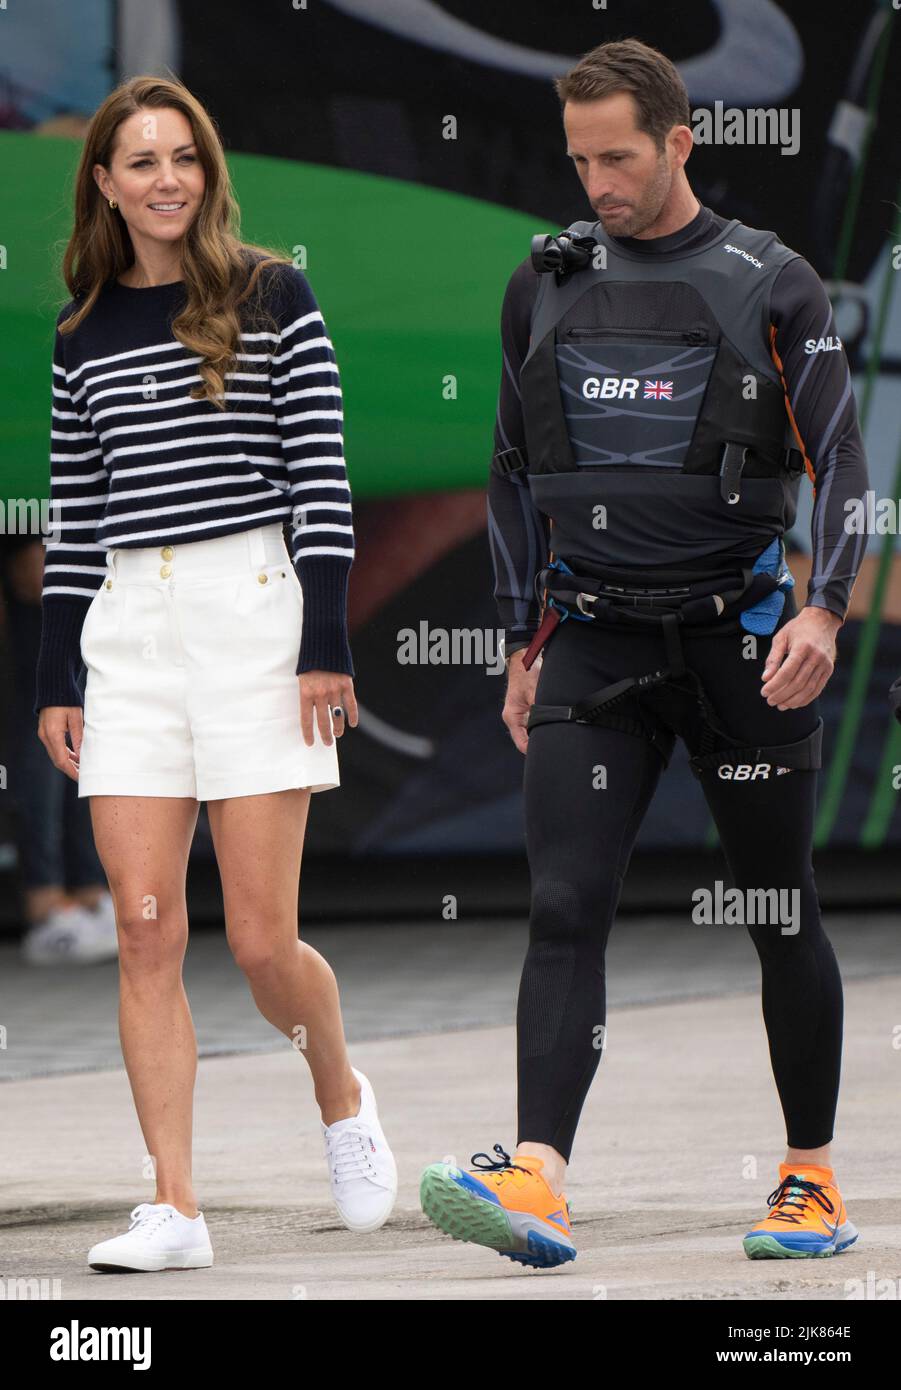 Plymouth, UK. 31 July, 2022.  Catherine, Duchess Of Cambridge chats to Sir Ben Ainslie as she visits the 1851 Trust and the Great Britain SailGP in Plymouth.  During the visit, the Duchess of Cambridge took part in activities educating young people about sustainability.  Credit: Anwar Hussein/Alamy Live News Stock Photo